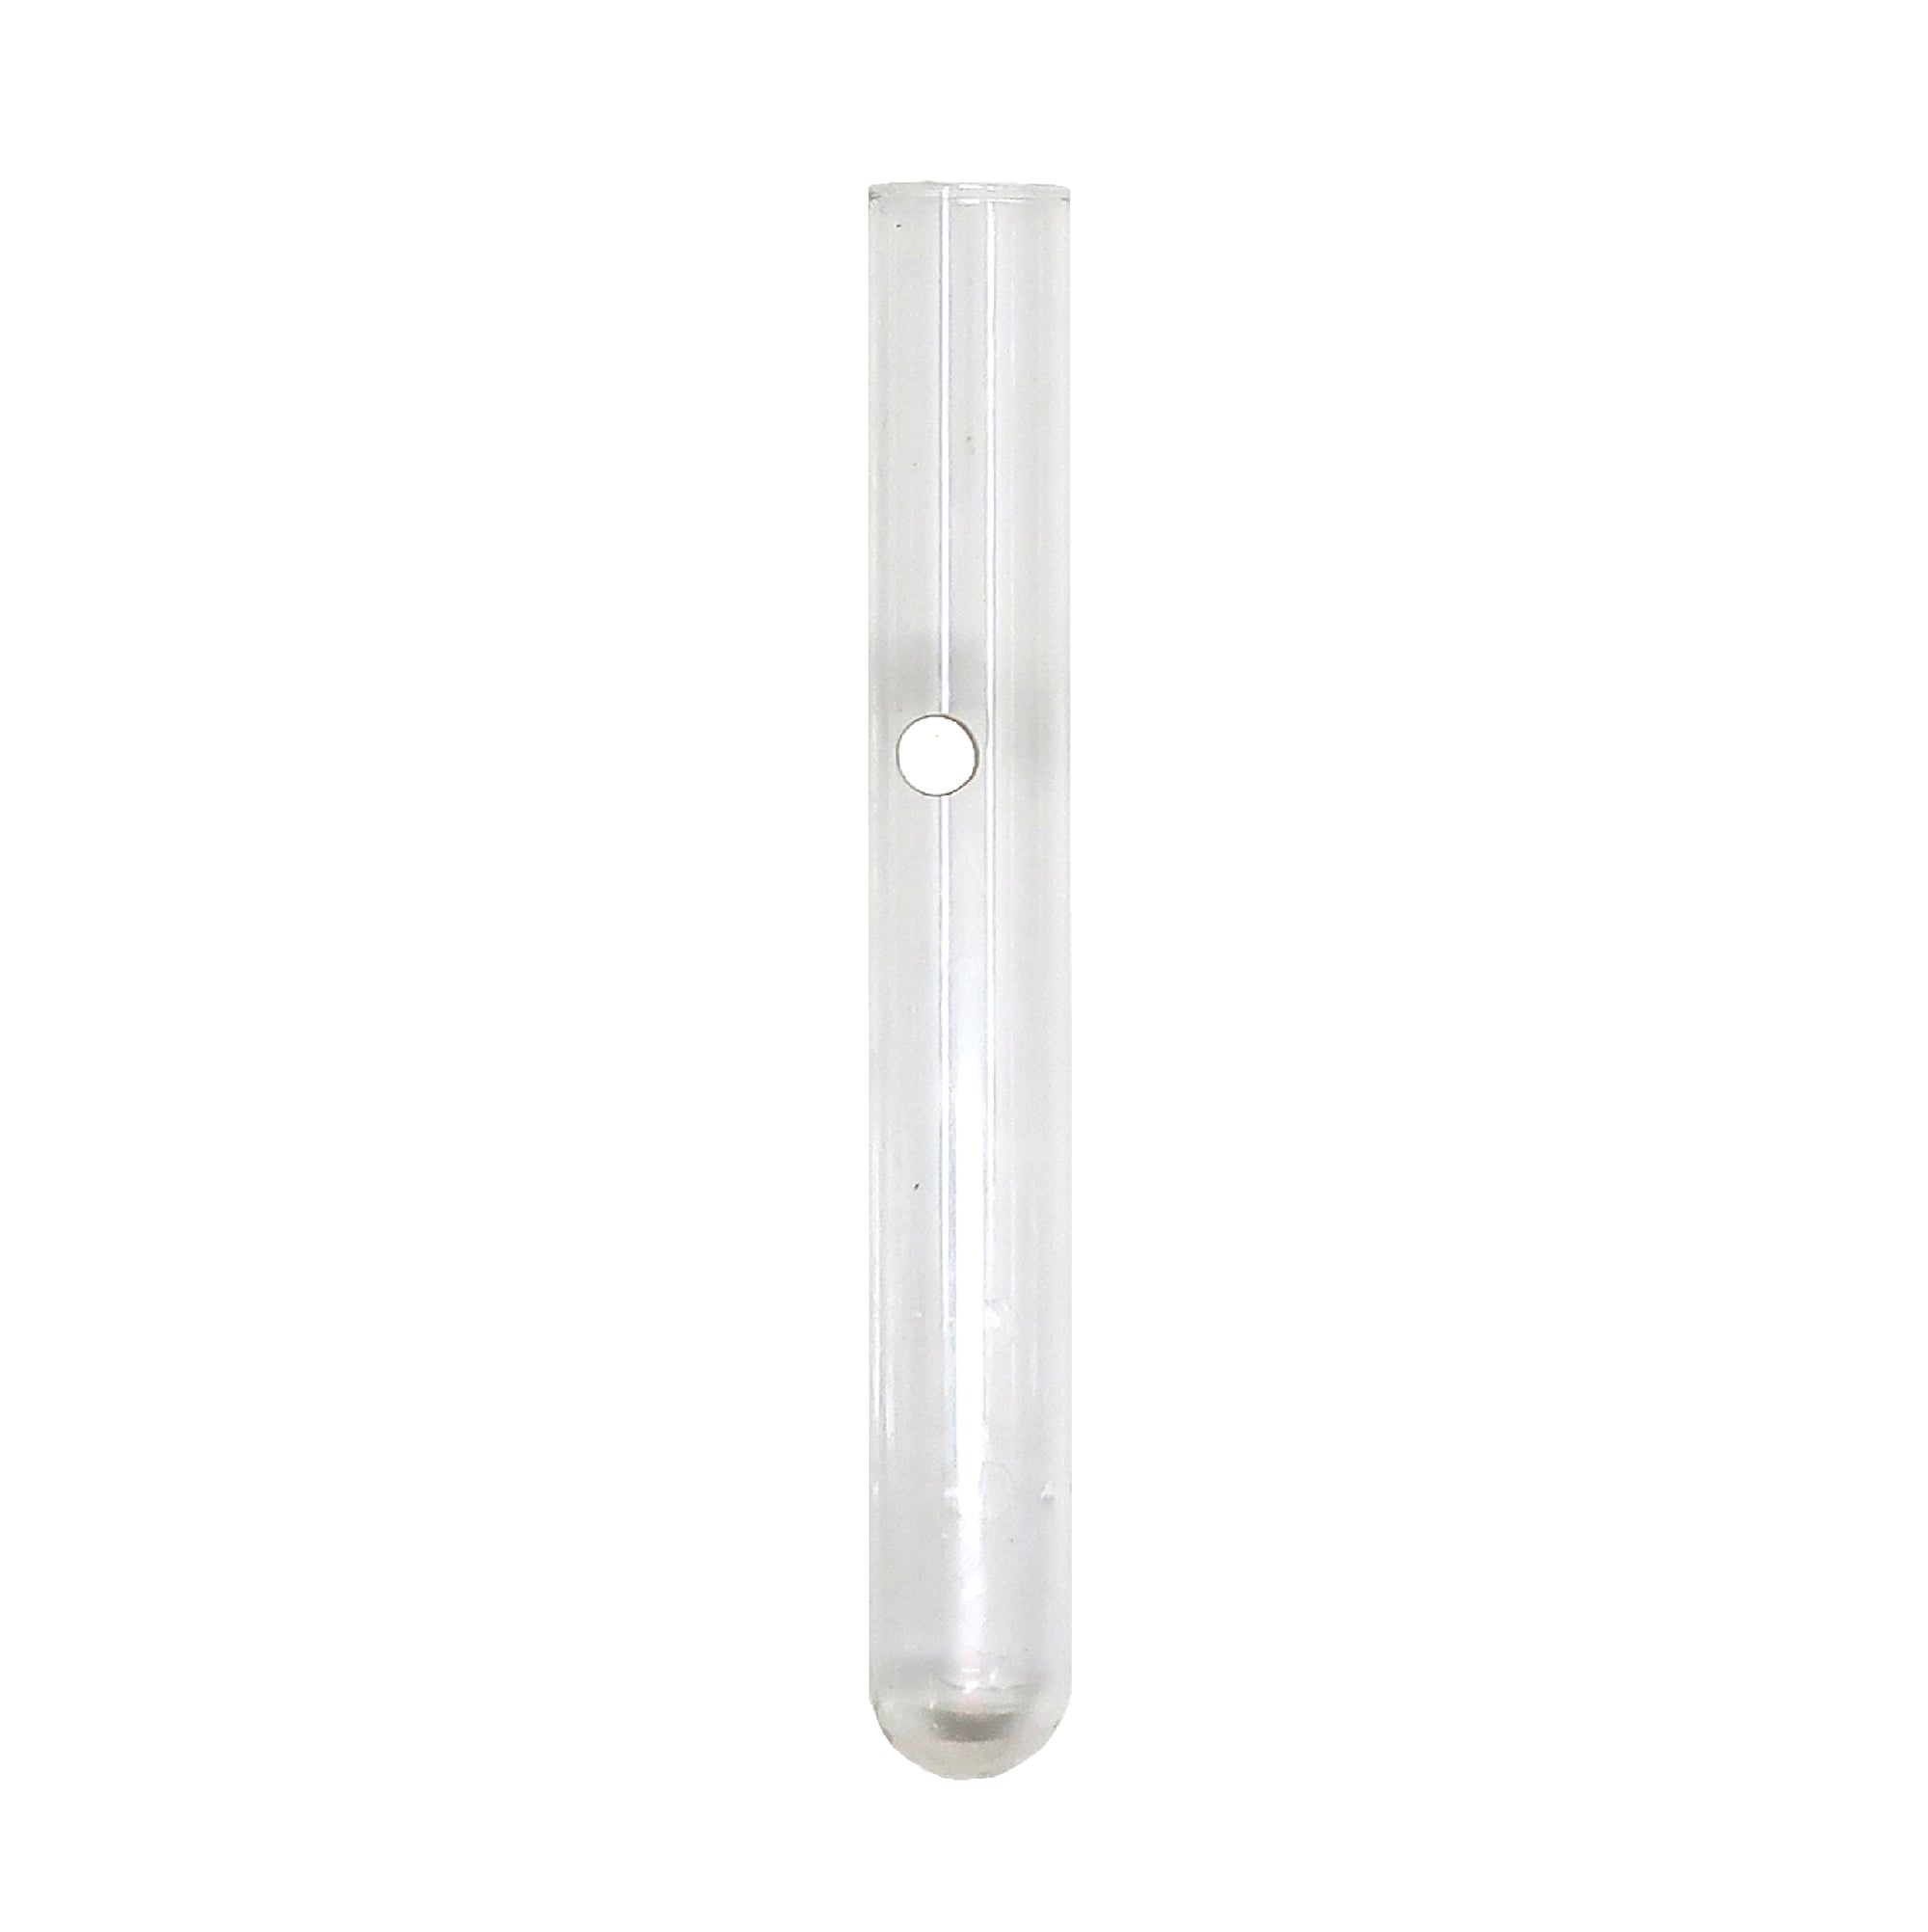 Replacement Magnetic Test Tube - Iron & Sprout